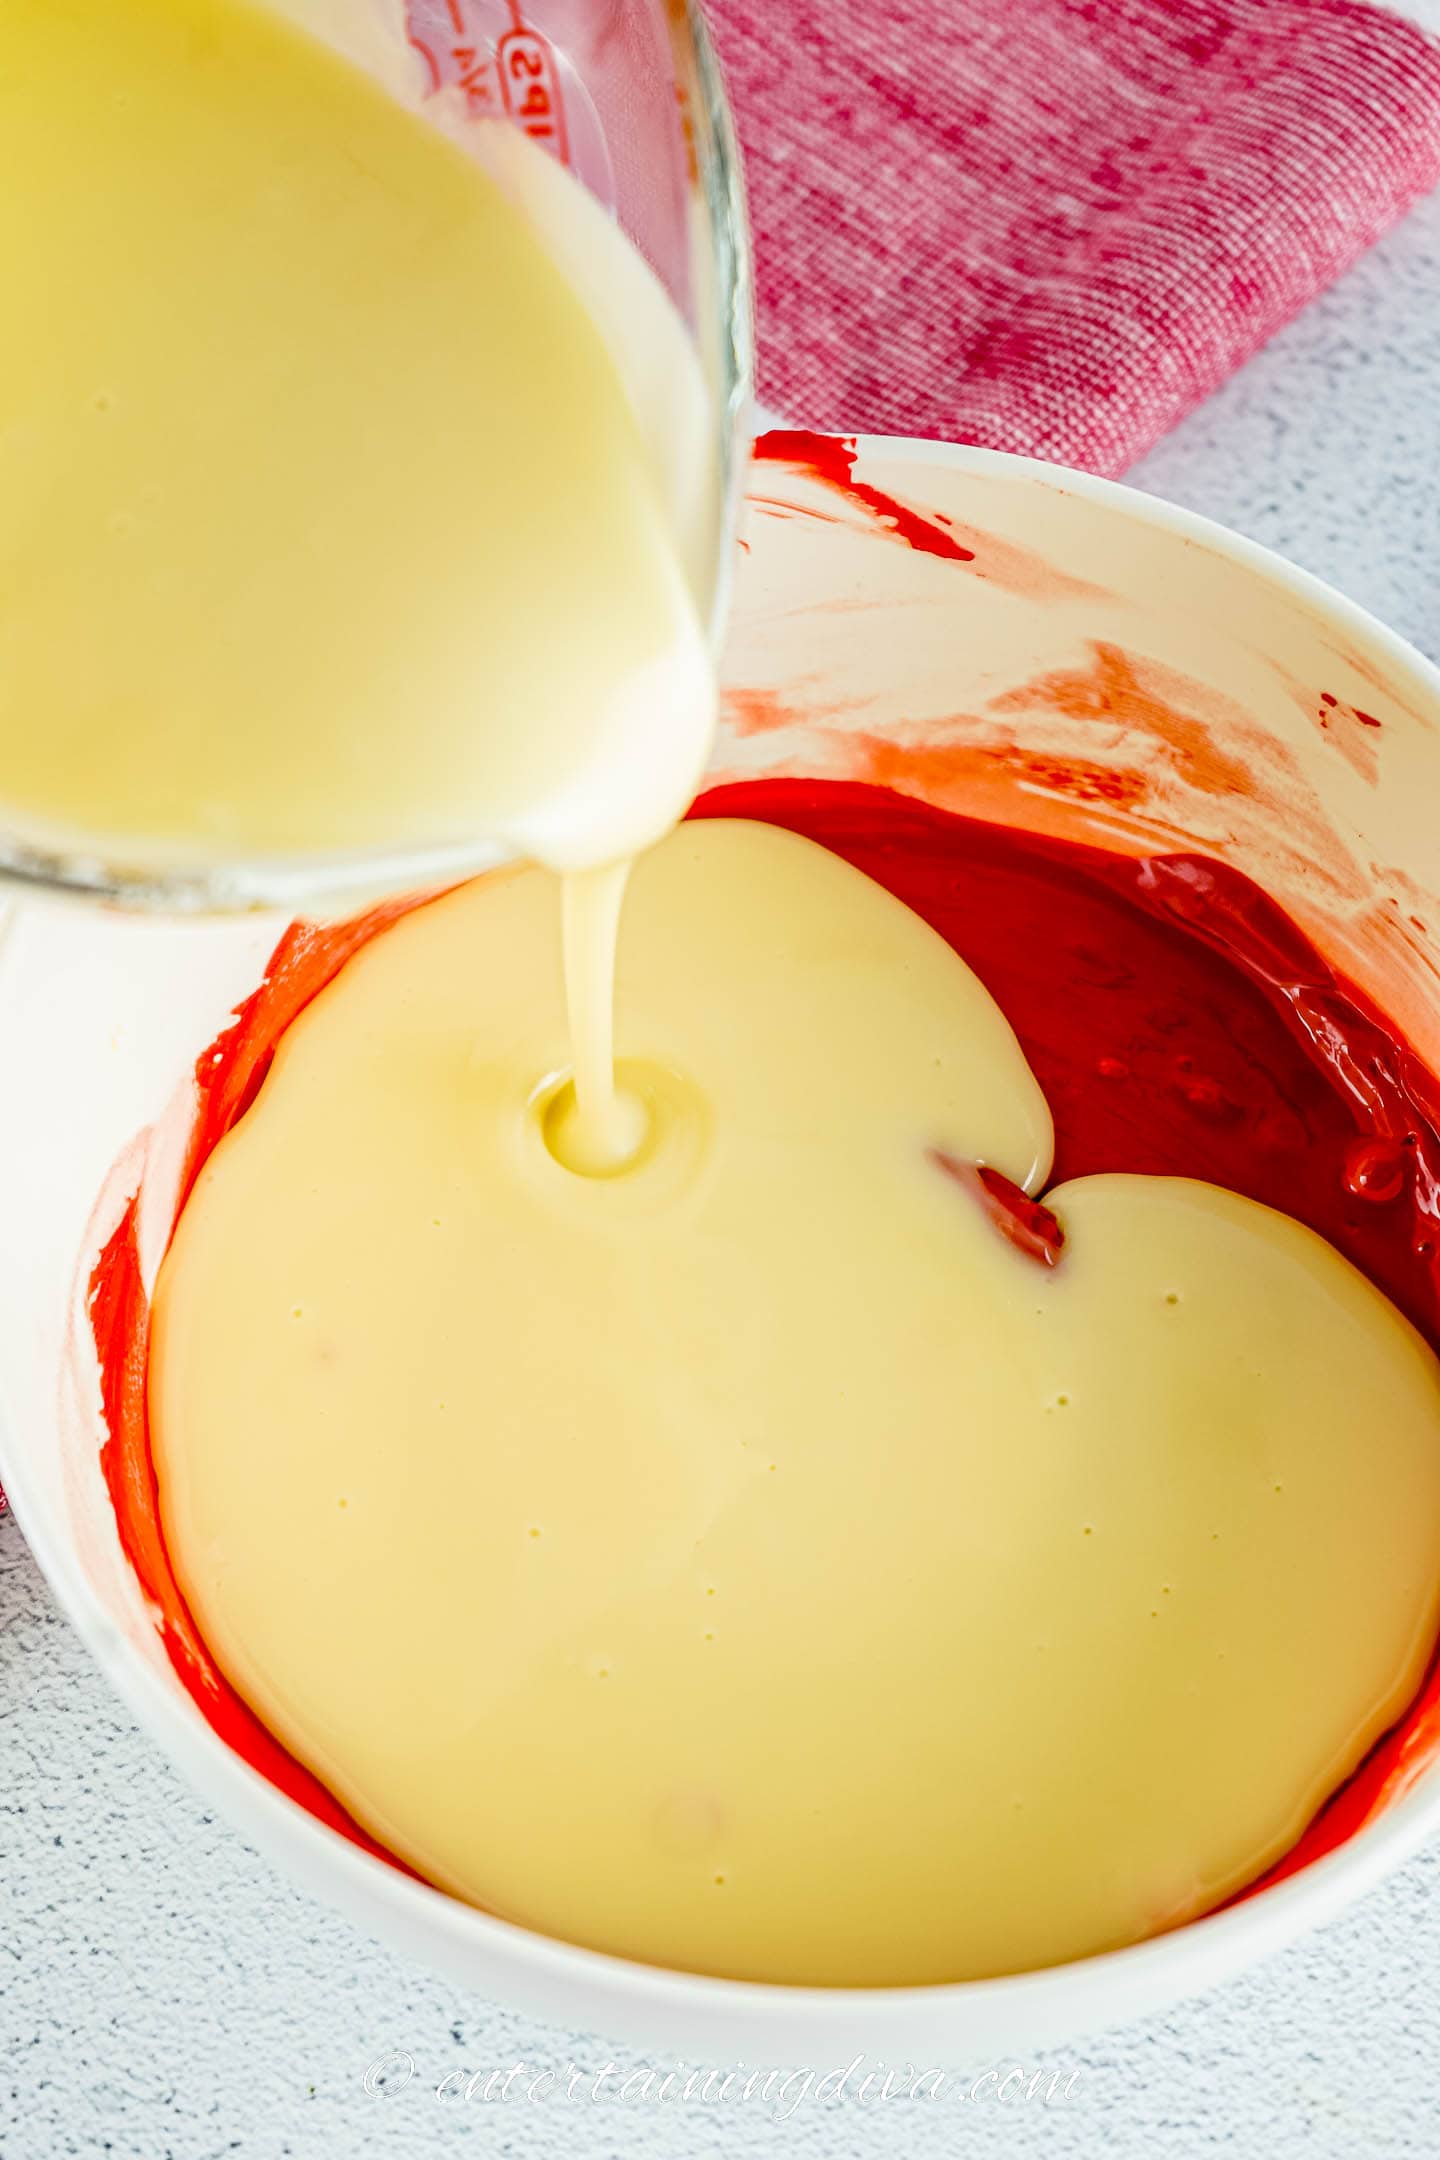 Melted buttercream frosting being poured into red candy chocolate candy melts